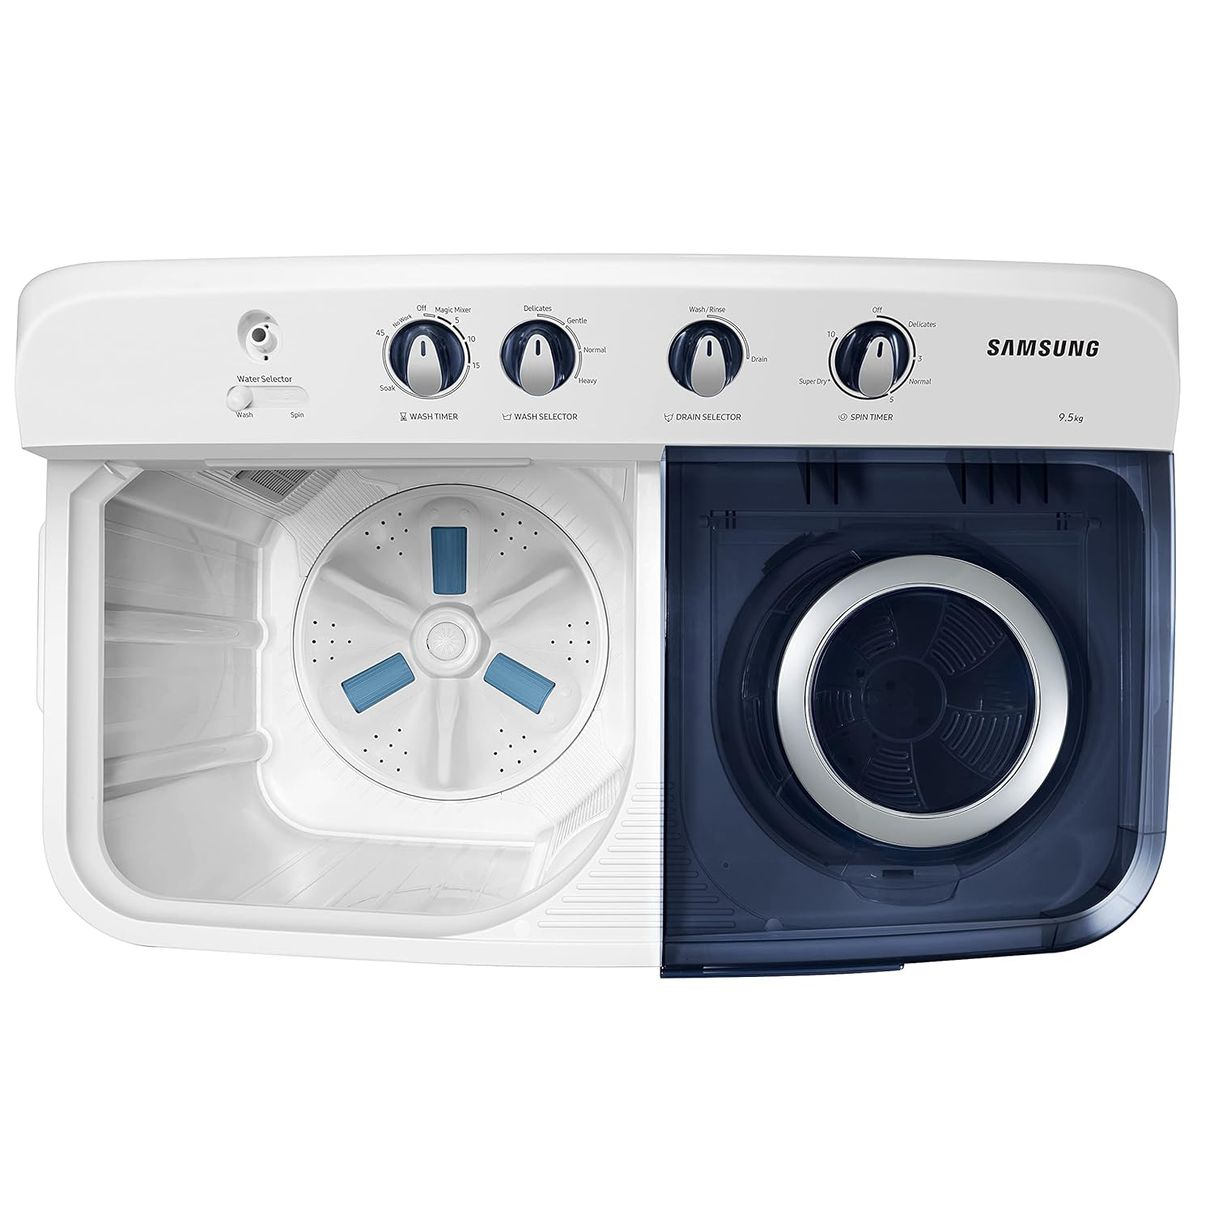 Washing Machine: Stylish Light Gray model for effective and quick cleaning.